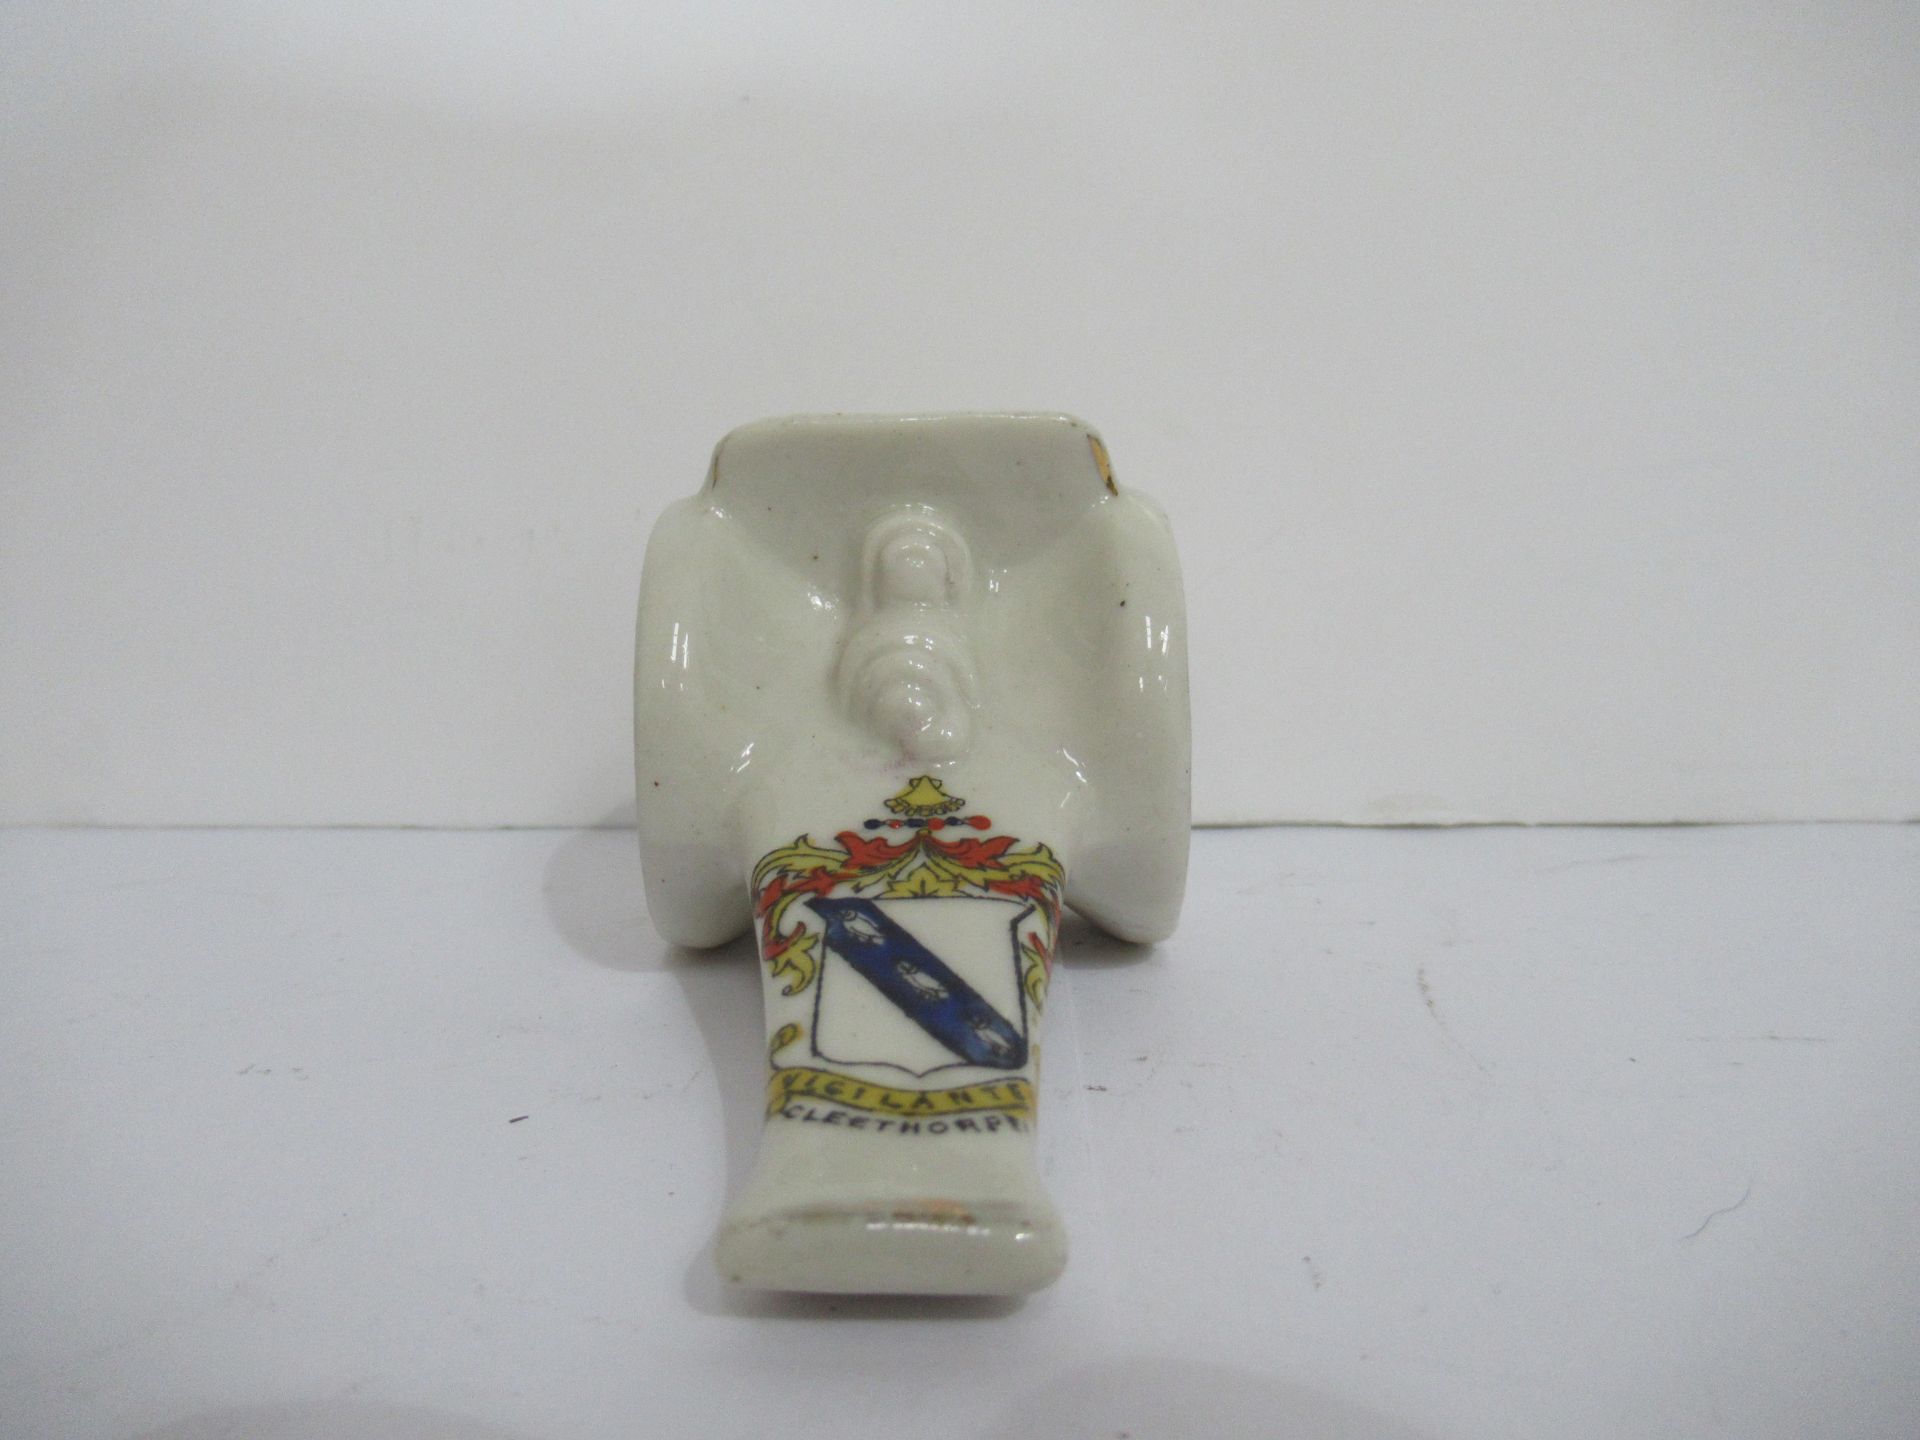 Crested China Waterfall Heraldic model of anti-aircraft gun with Cleethorpes coat of arms - Image 4 of 8